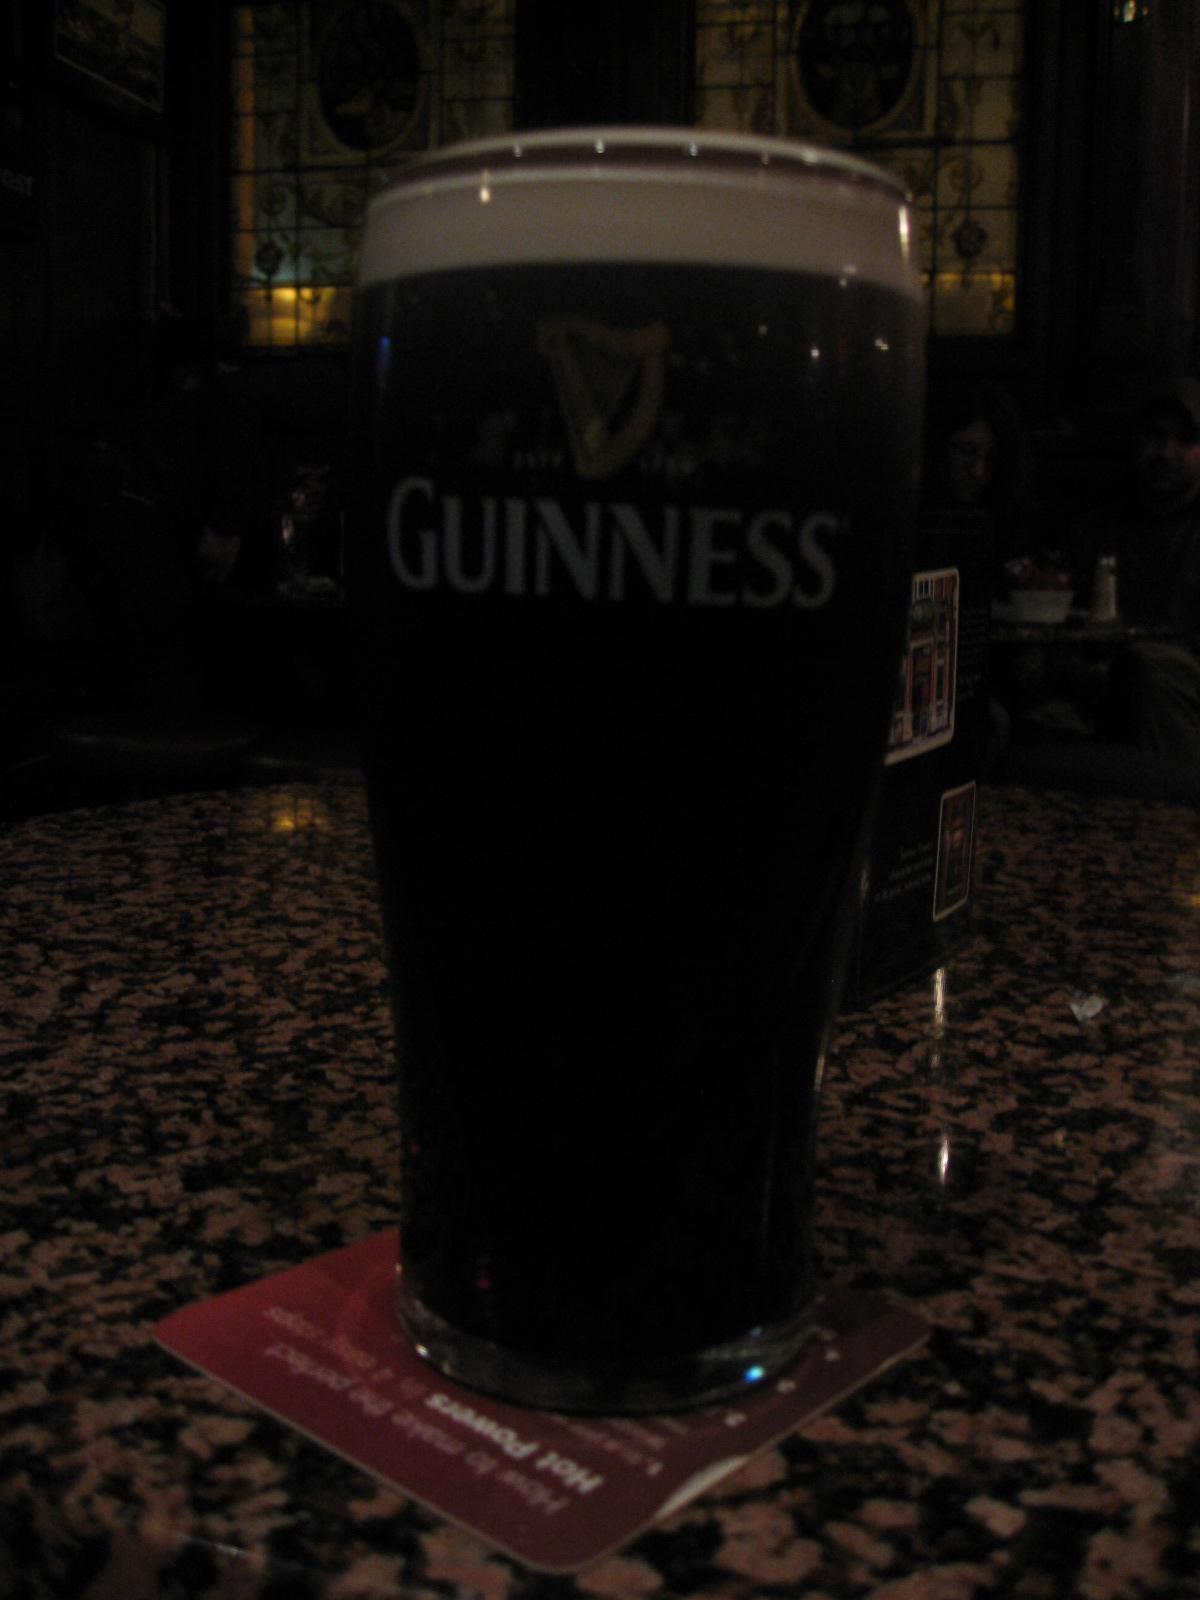 The customary pint of Guinness at The Stag's Head on Dame Lane, one of the better watering holes in town